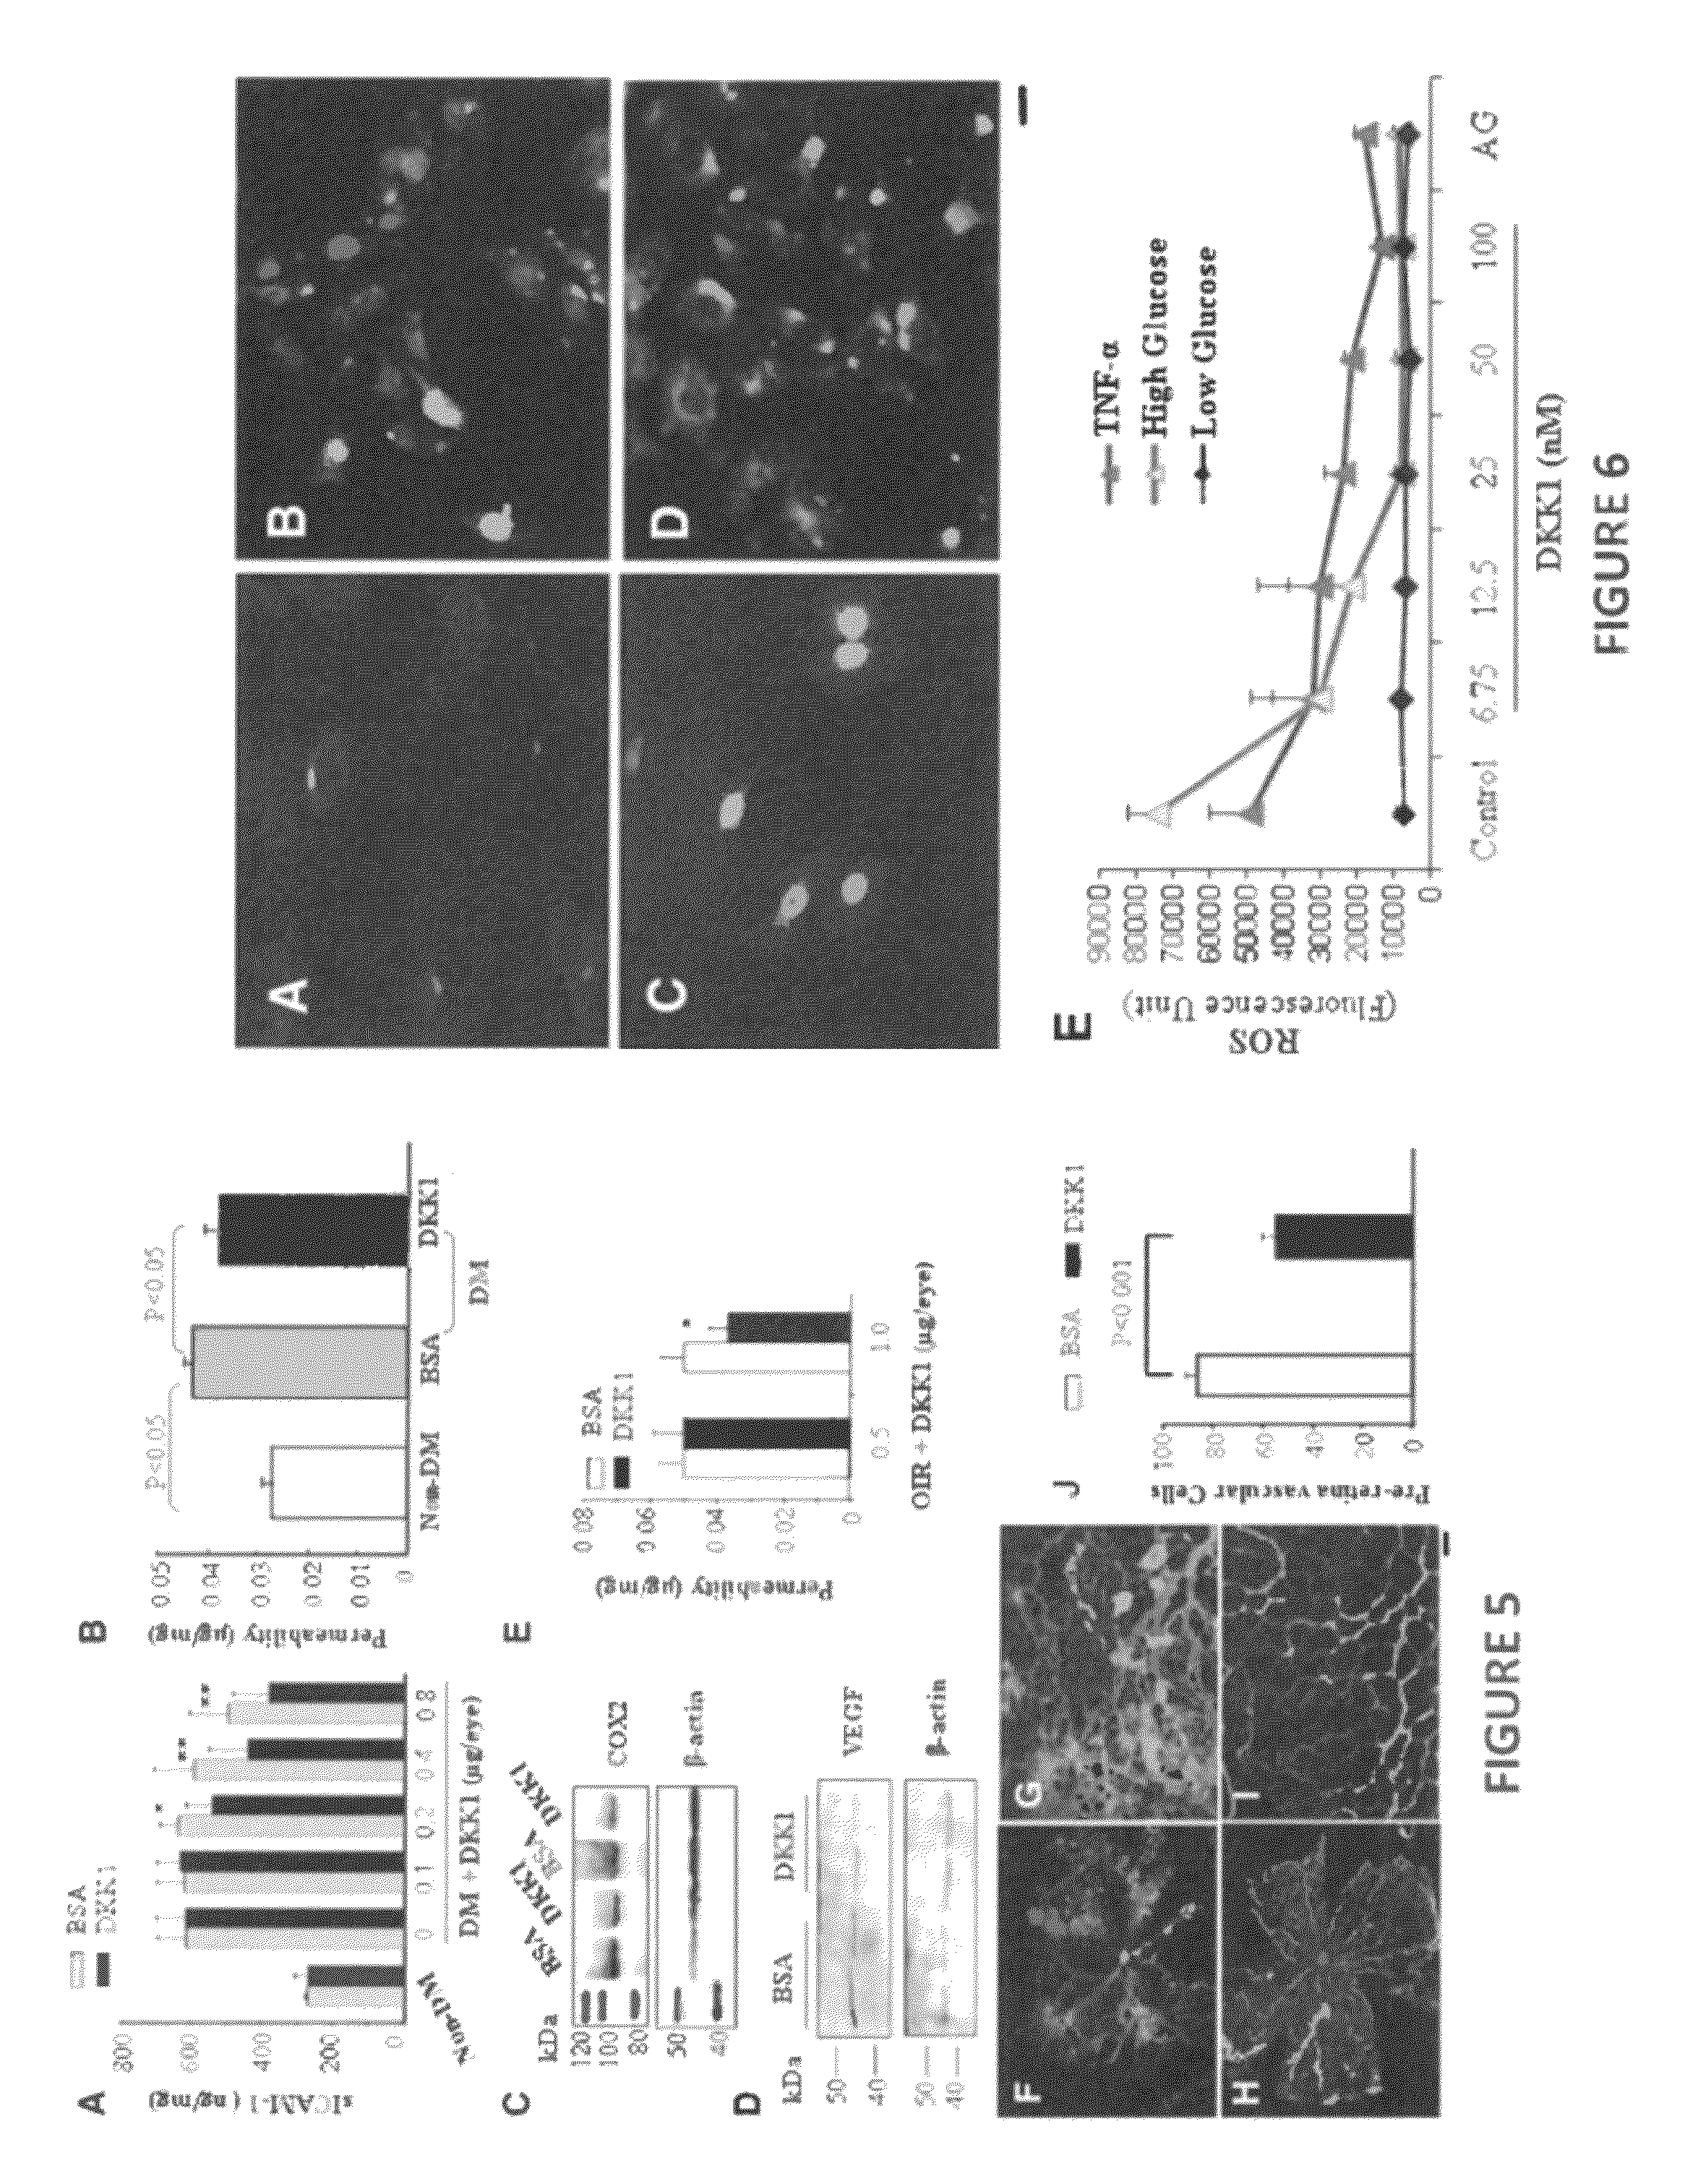 Monoclonal antibodies that inhibit the wnt signaling pathway and methods of production and use thereof